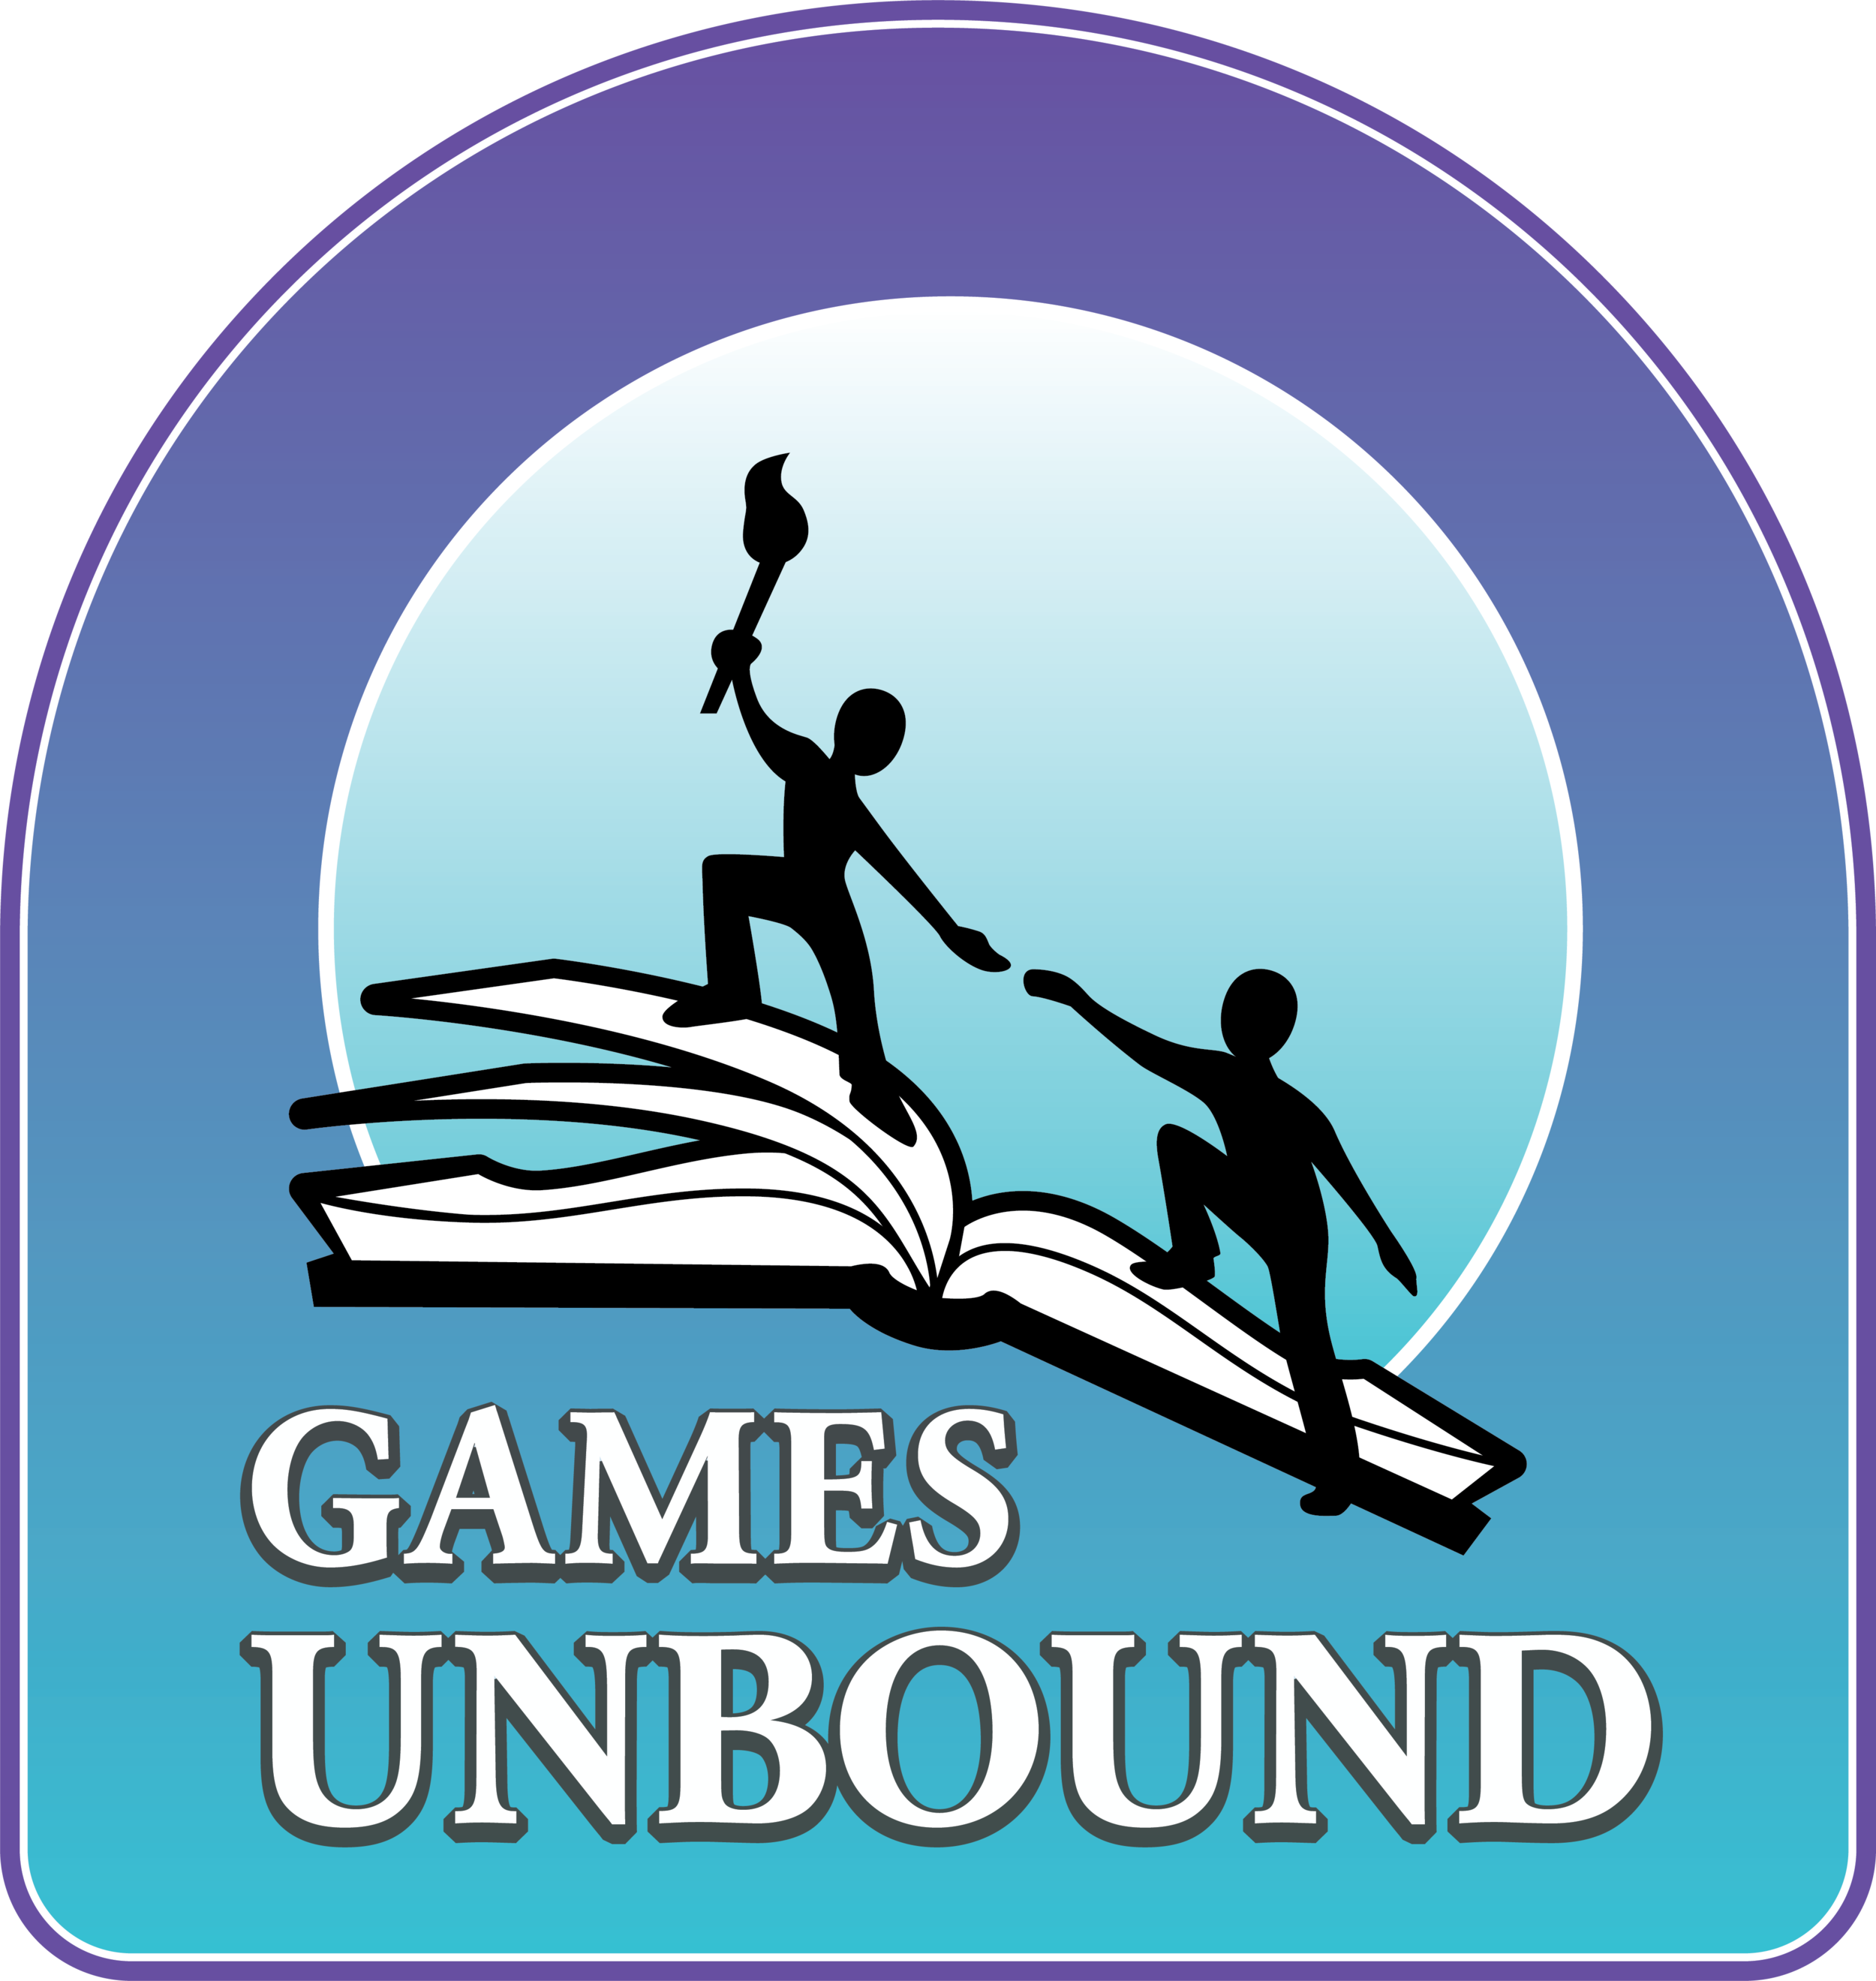 UNBOUNDED™  Play the Game for Free on PacoGames